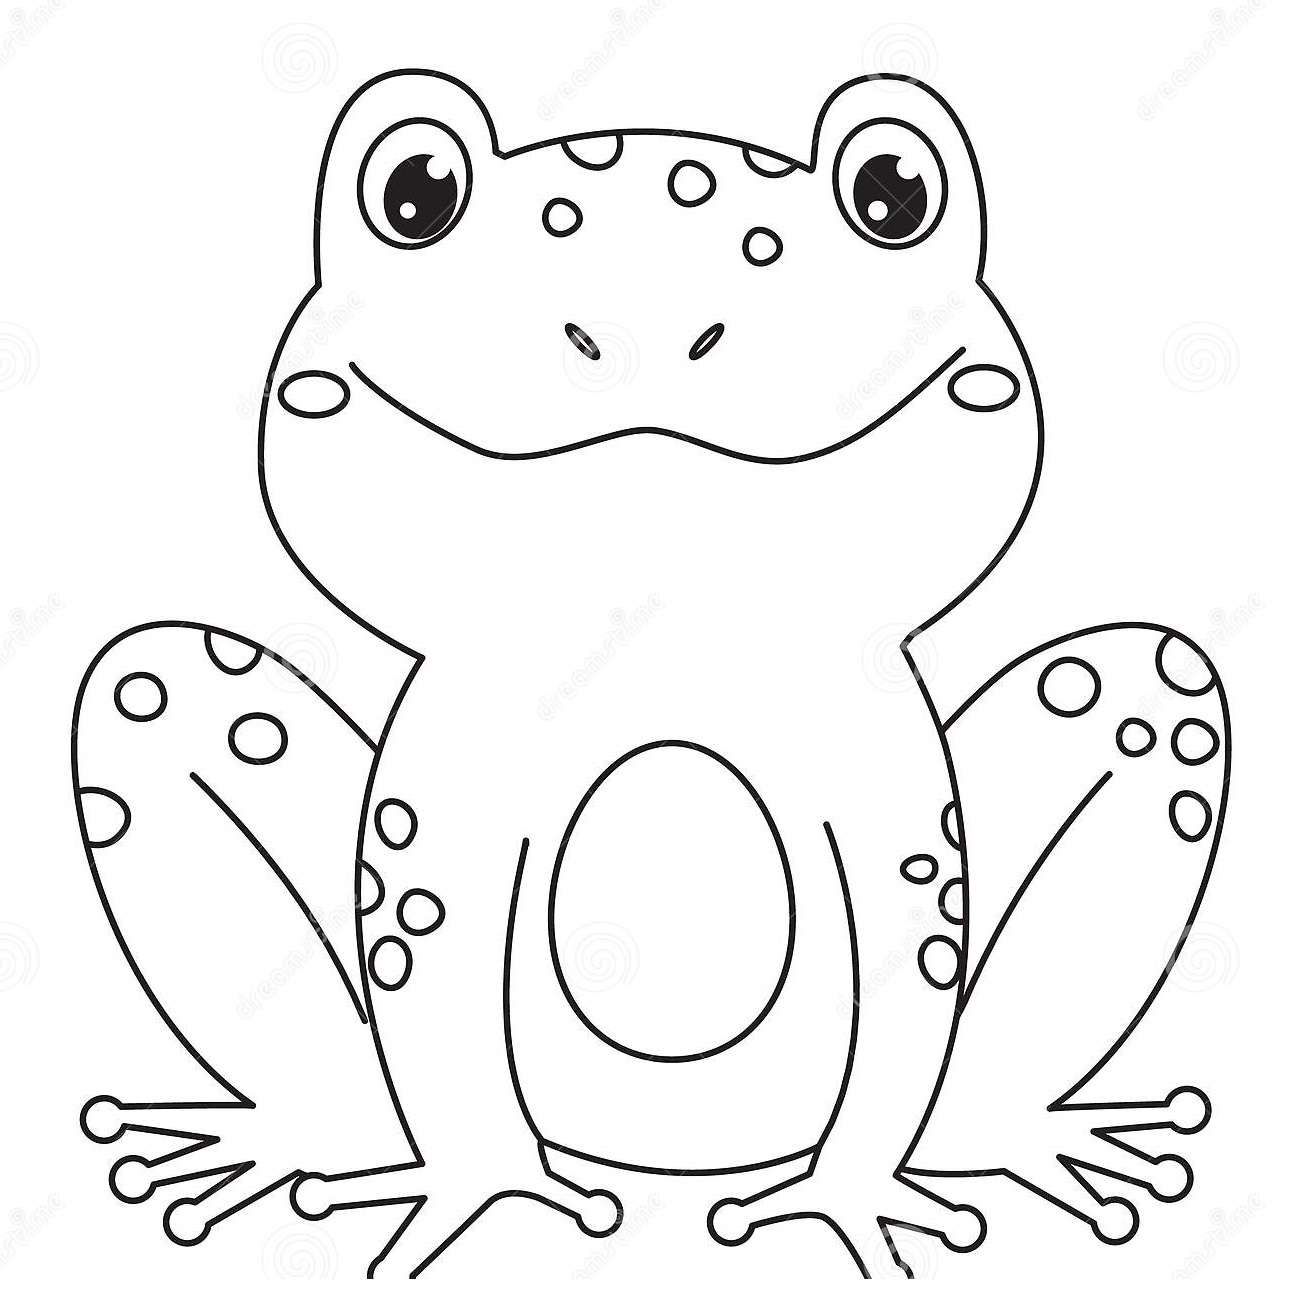 New Frog Coloring Pages   Coloring Cool